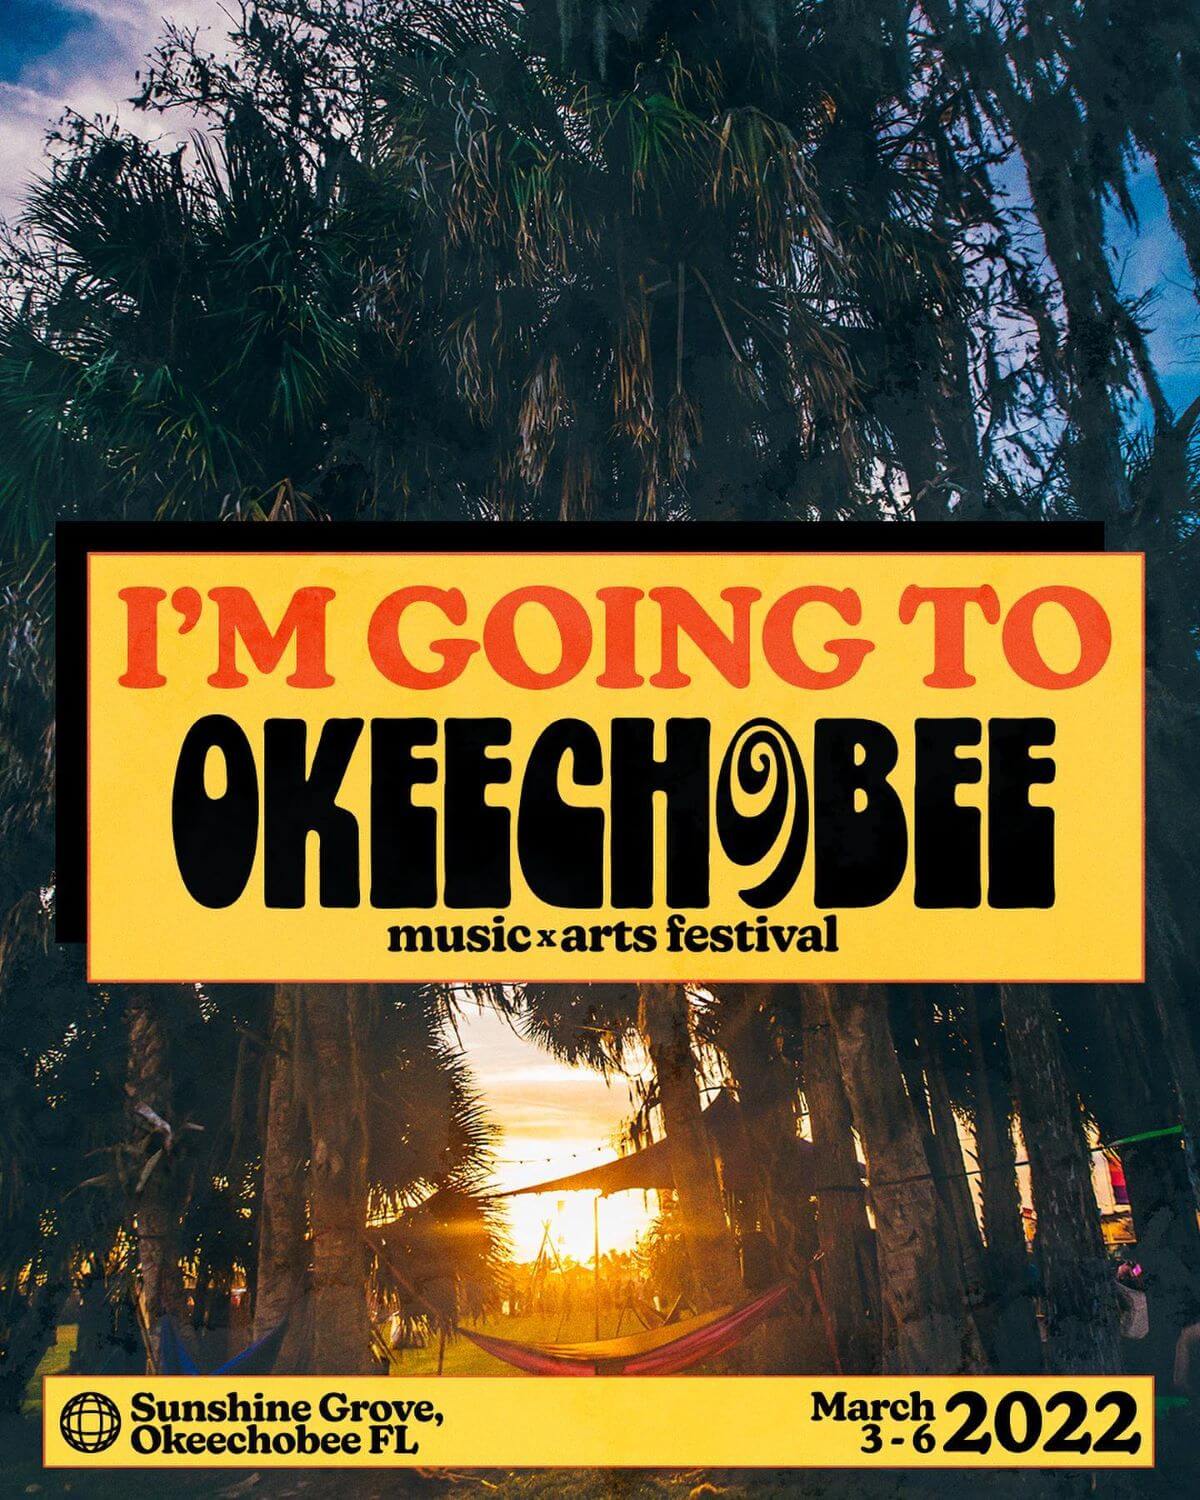 The Daily Lineup for Okeechobee 2022 is Here!